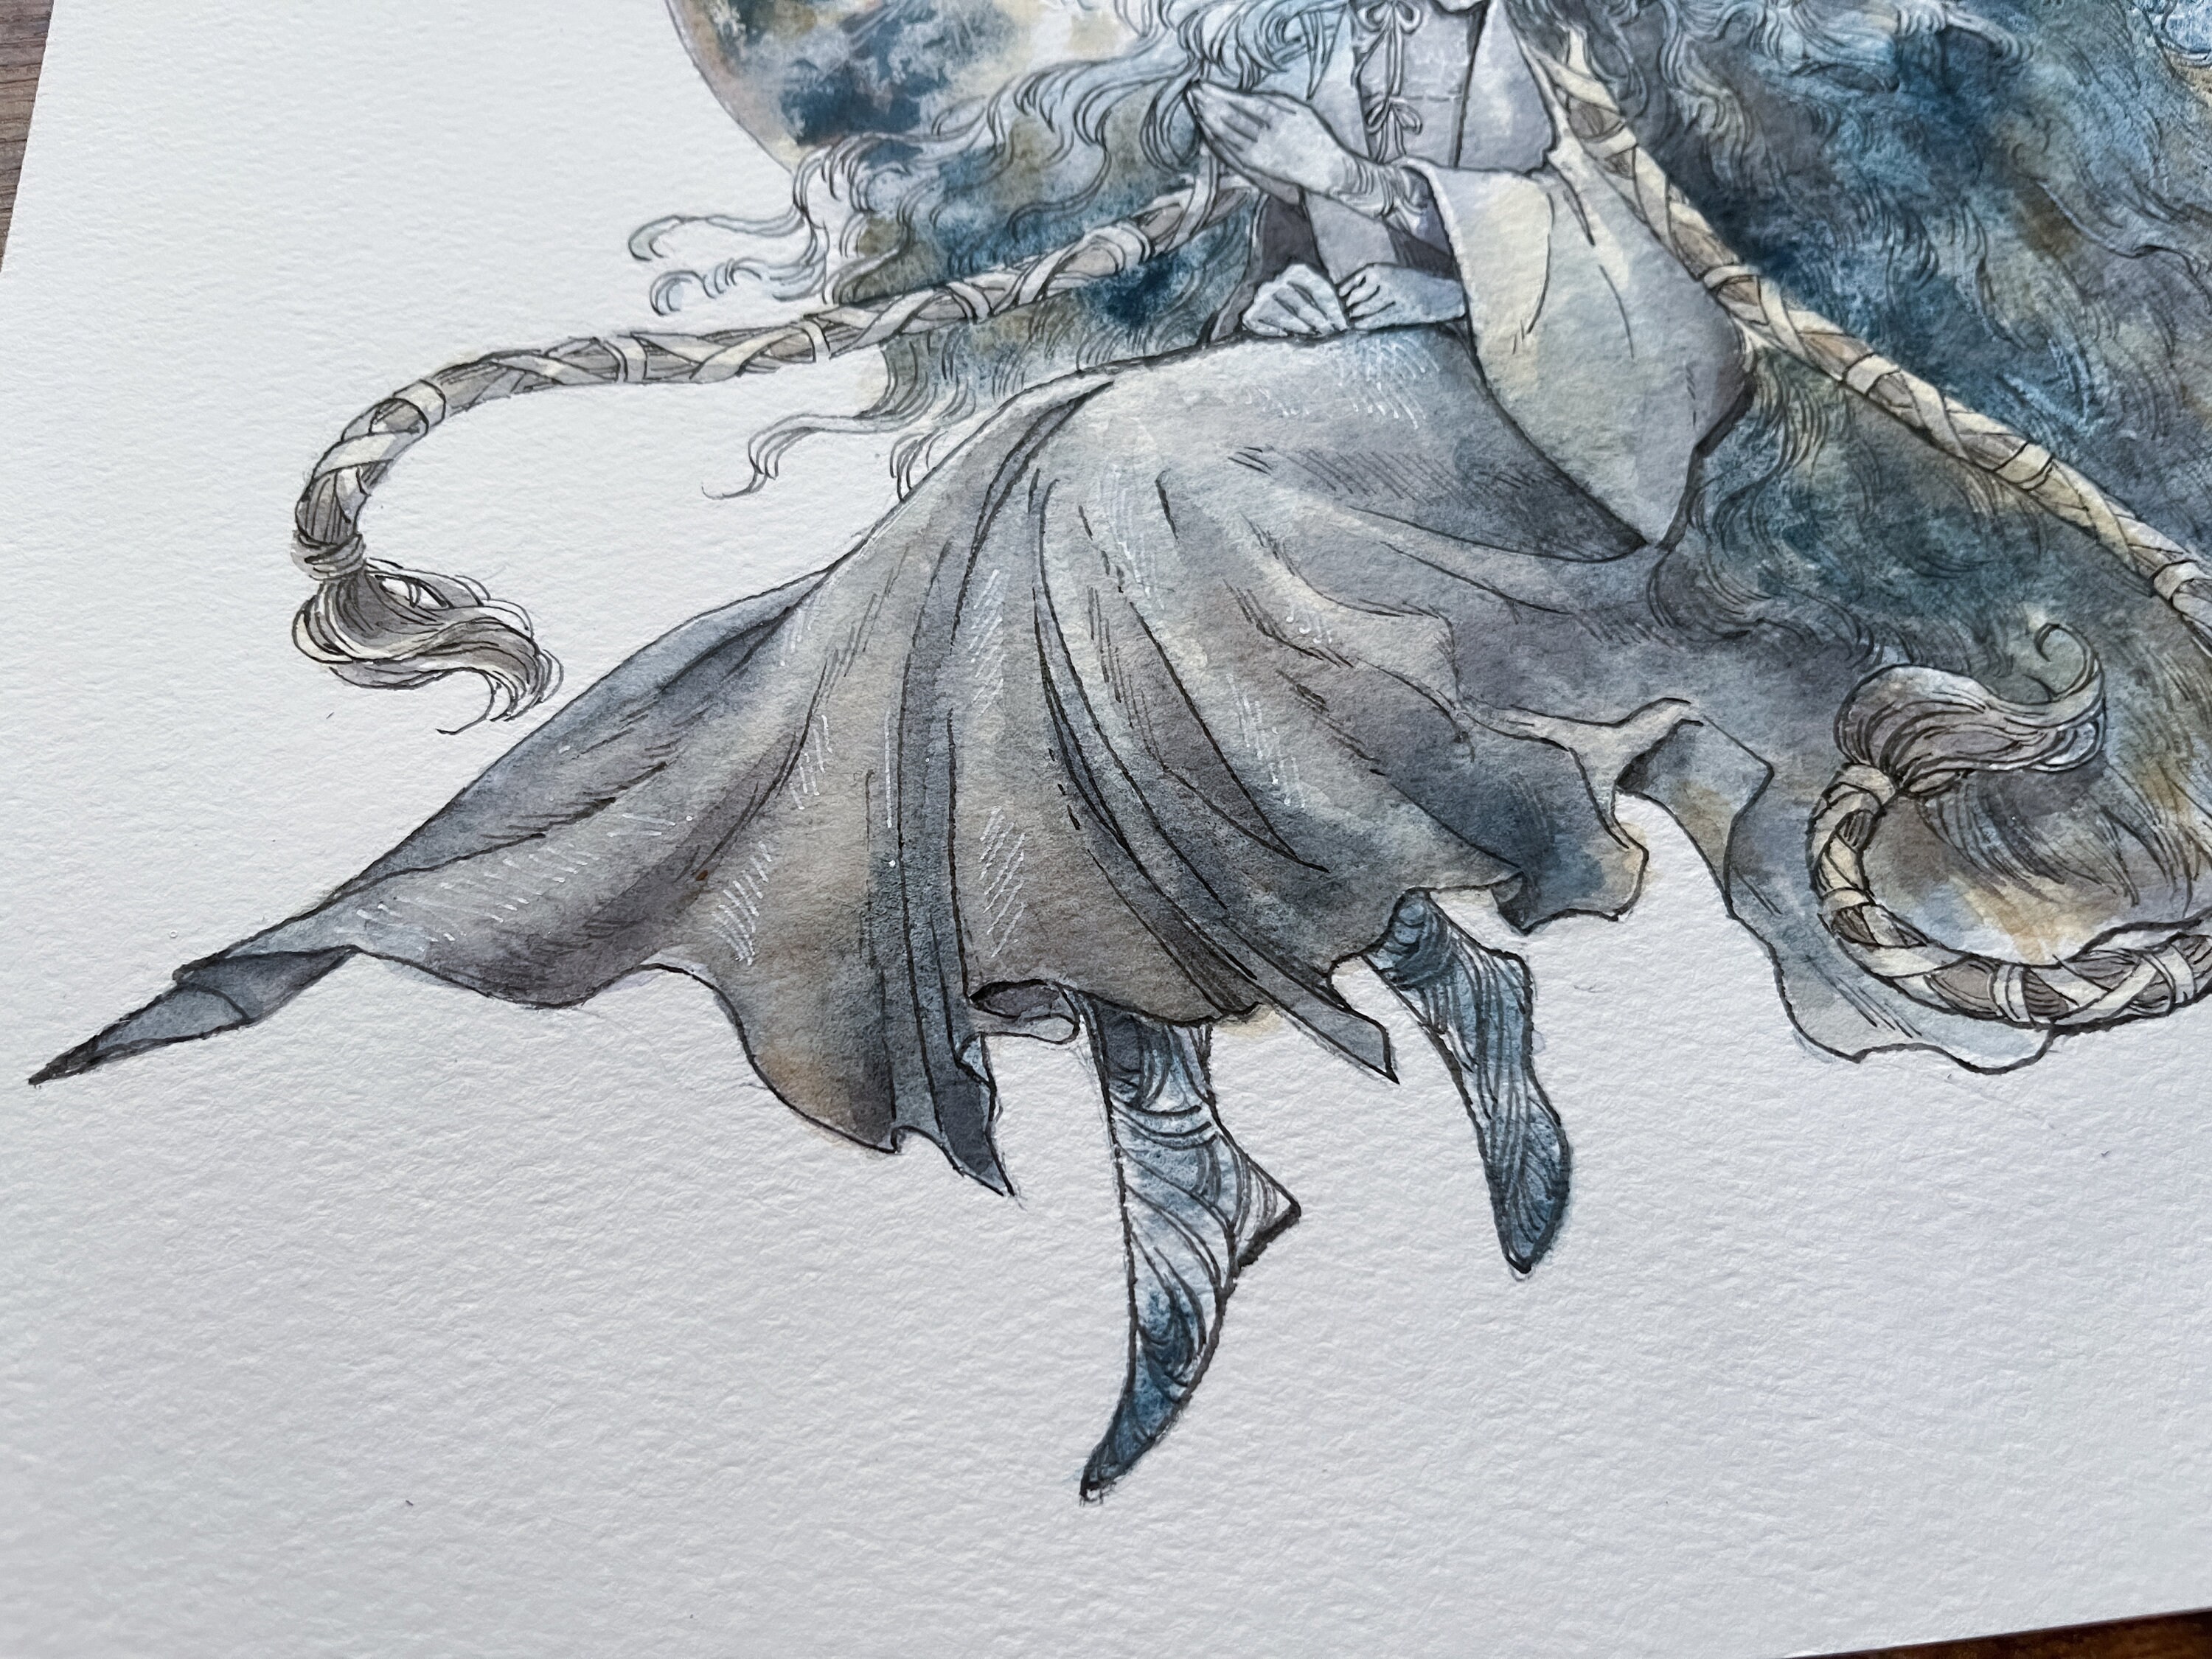 Elden Ring Ranni the Witch A4 Print Fan Art Watercolor 